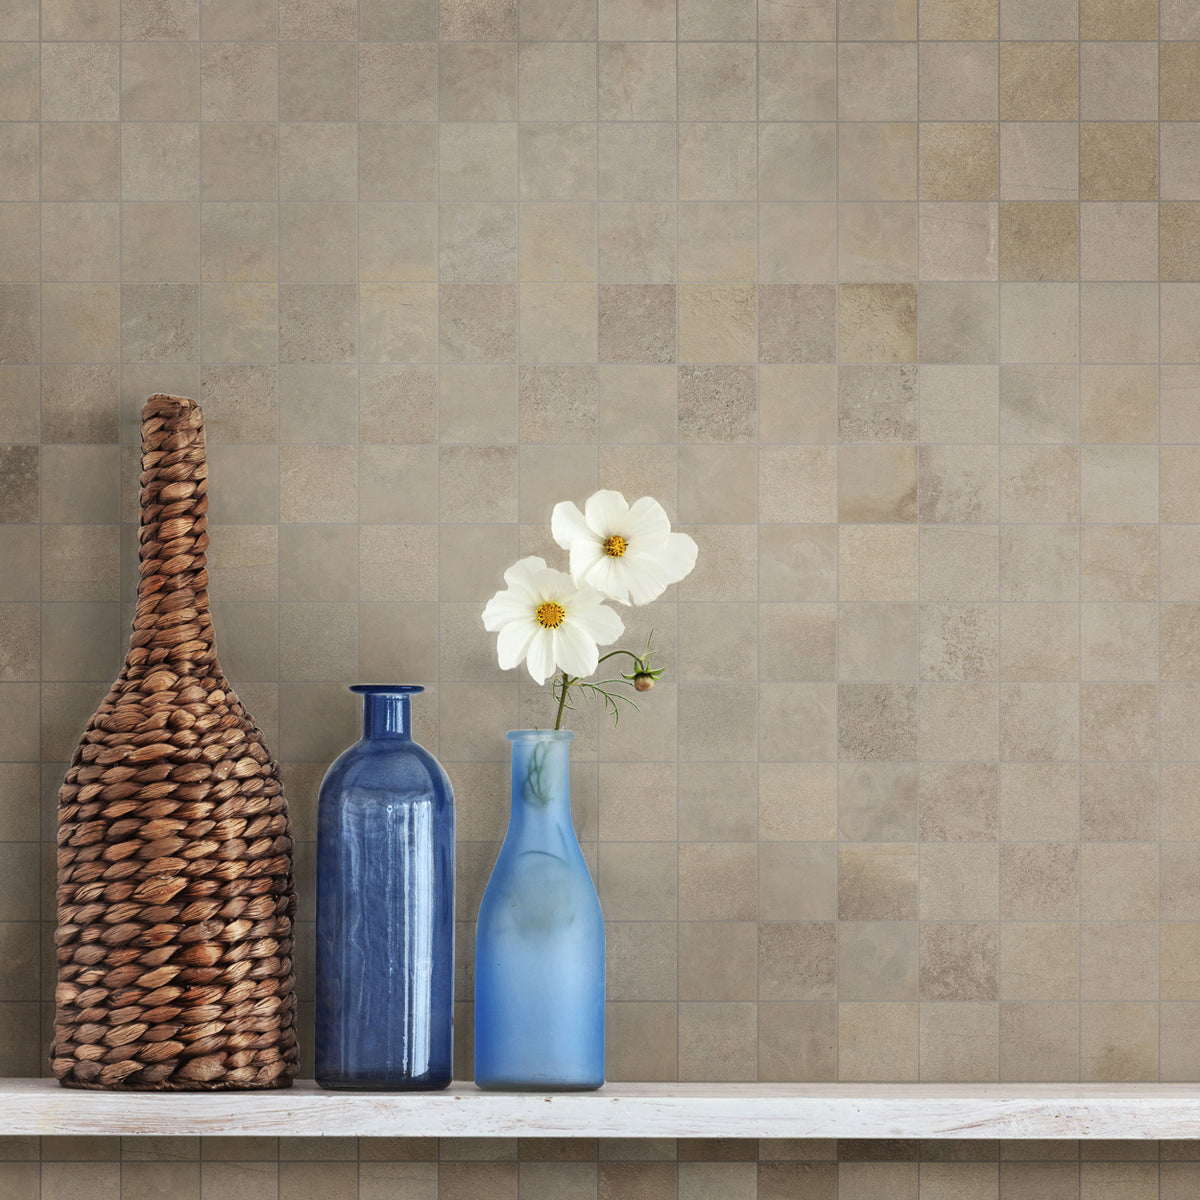 Lungarno Ceramics - Disk 2 in. x 2 in. Porcelain Mosaic - Beige Wall Install